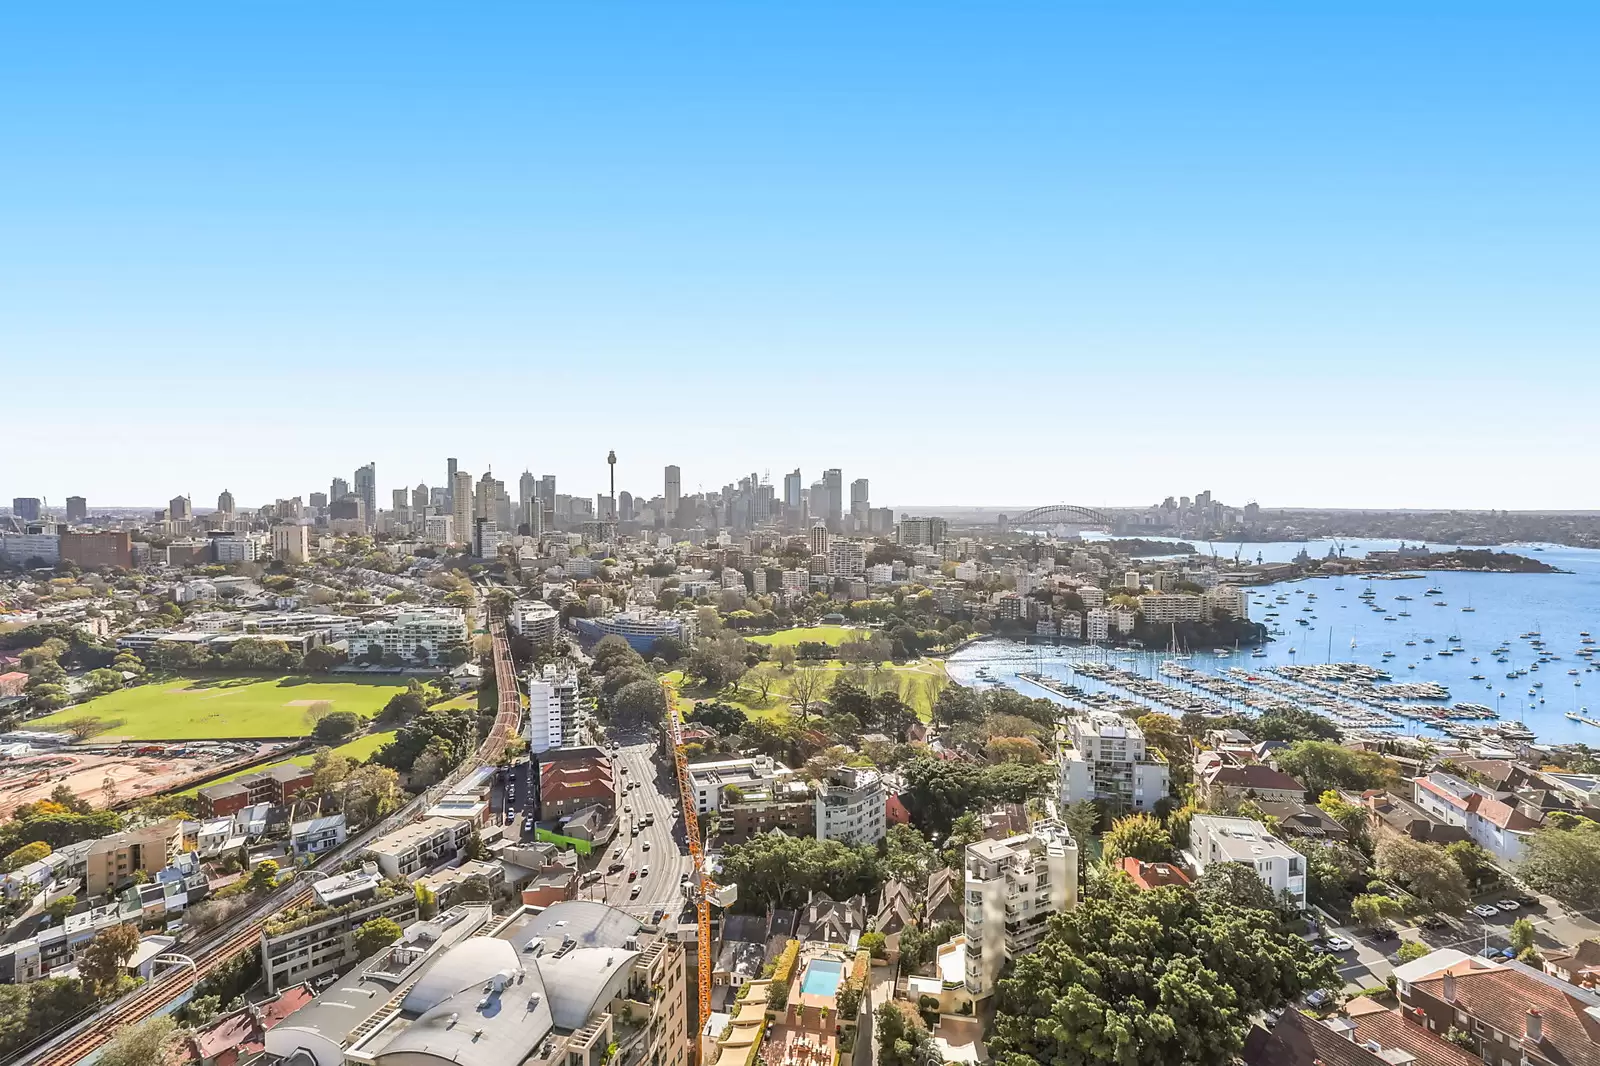 Photo #16: 27B/3 Darling Point Road, Darling Point - Sold by Sydney Sotheby's International Realty